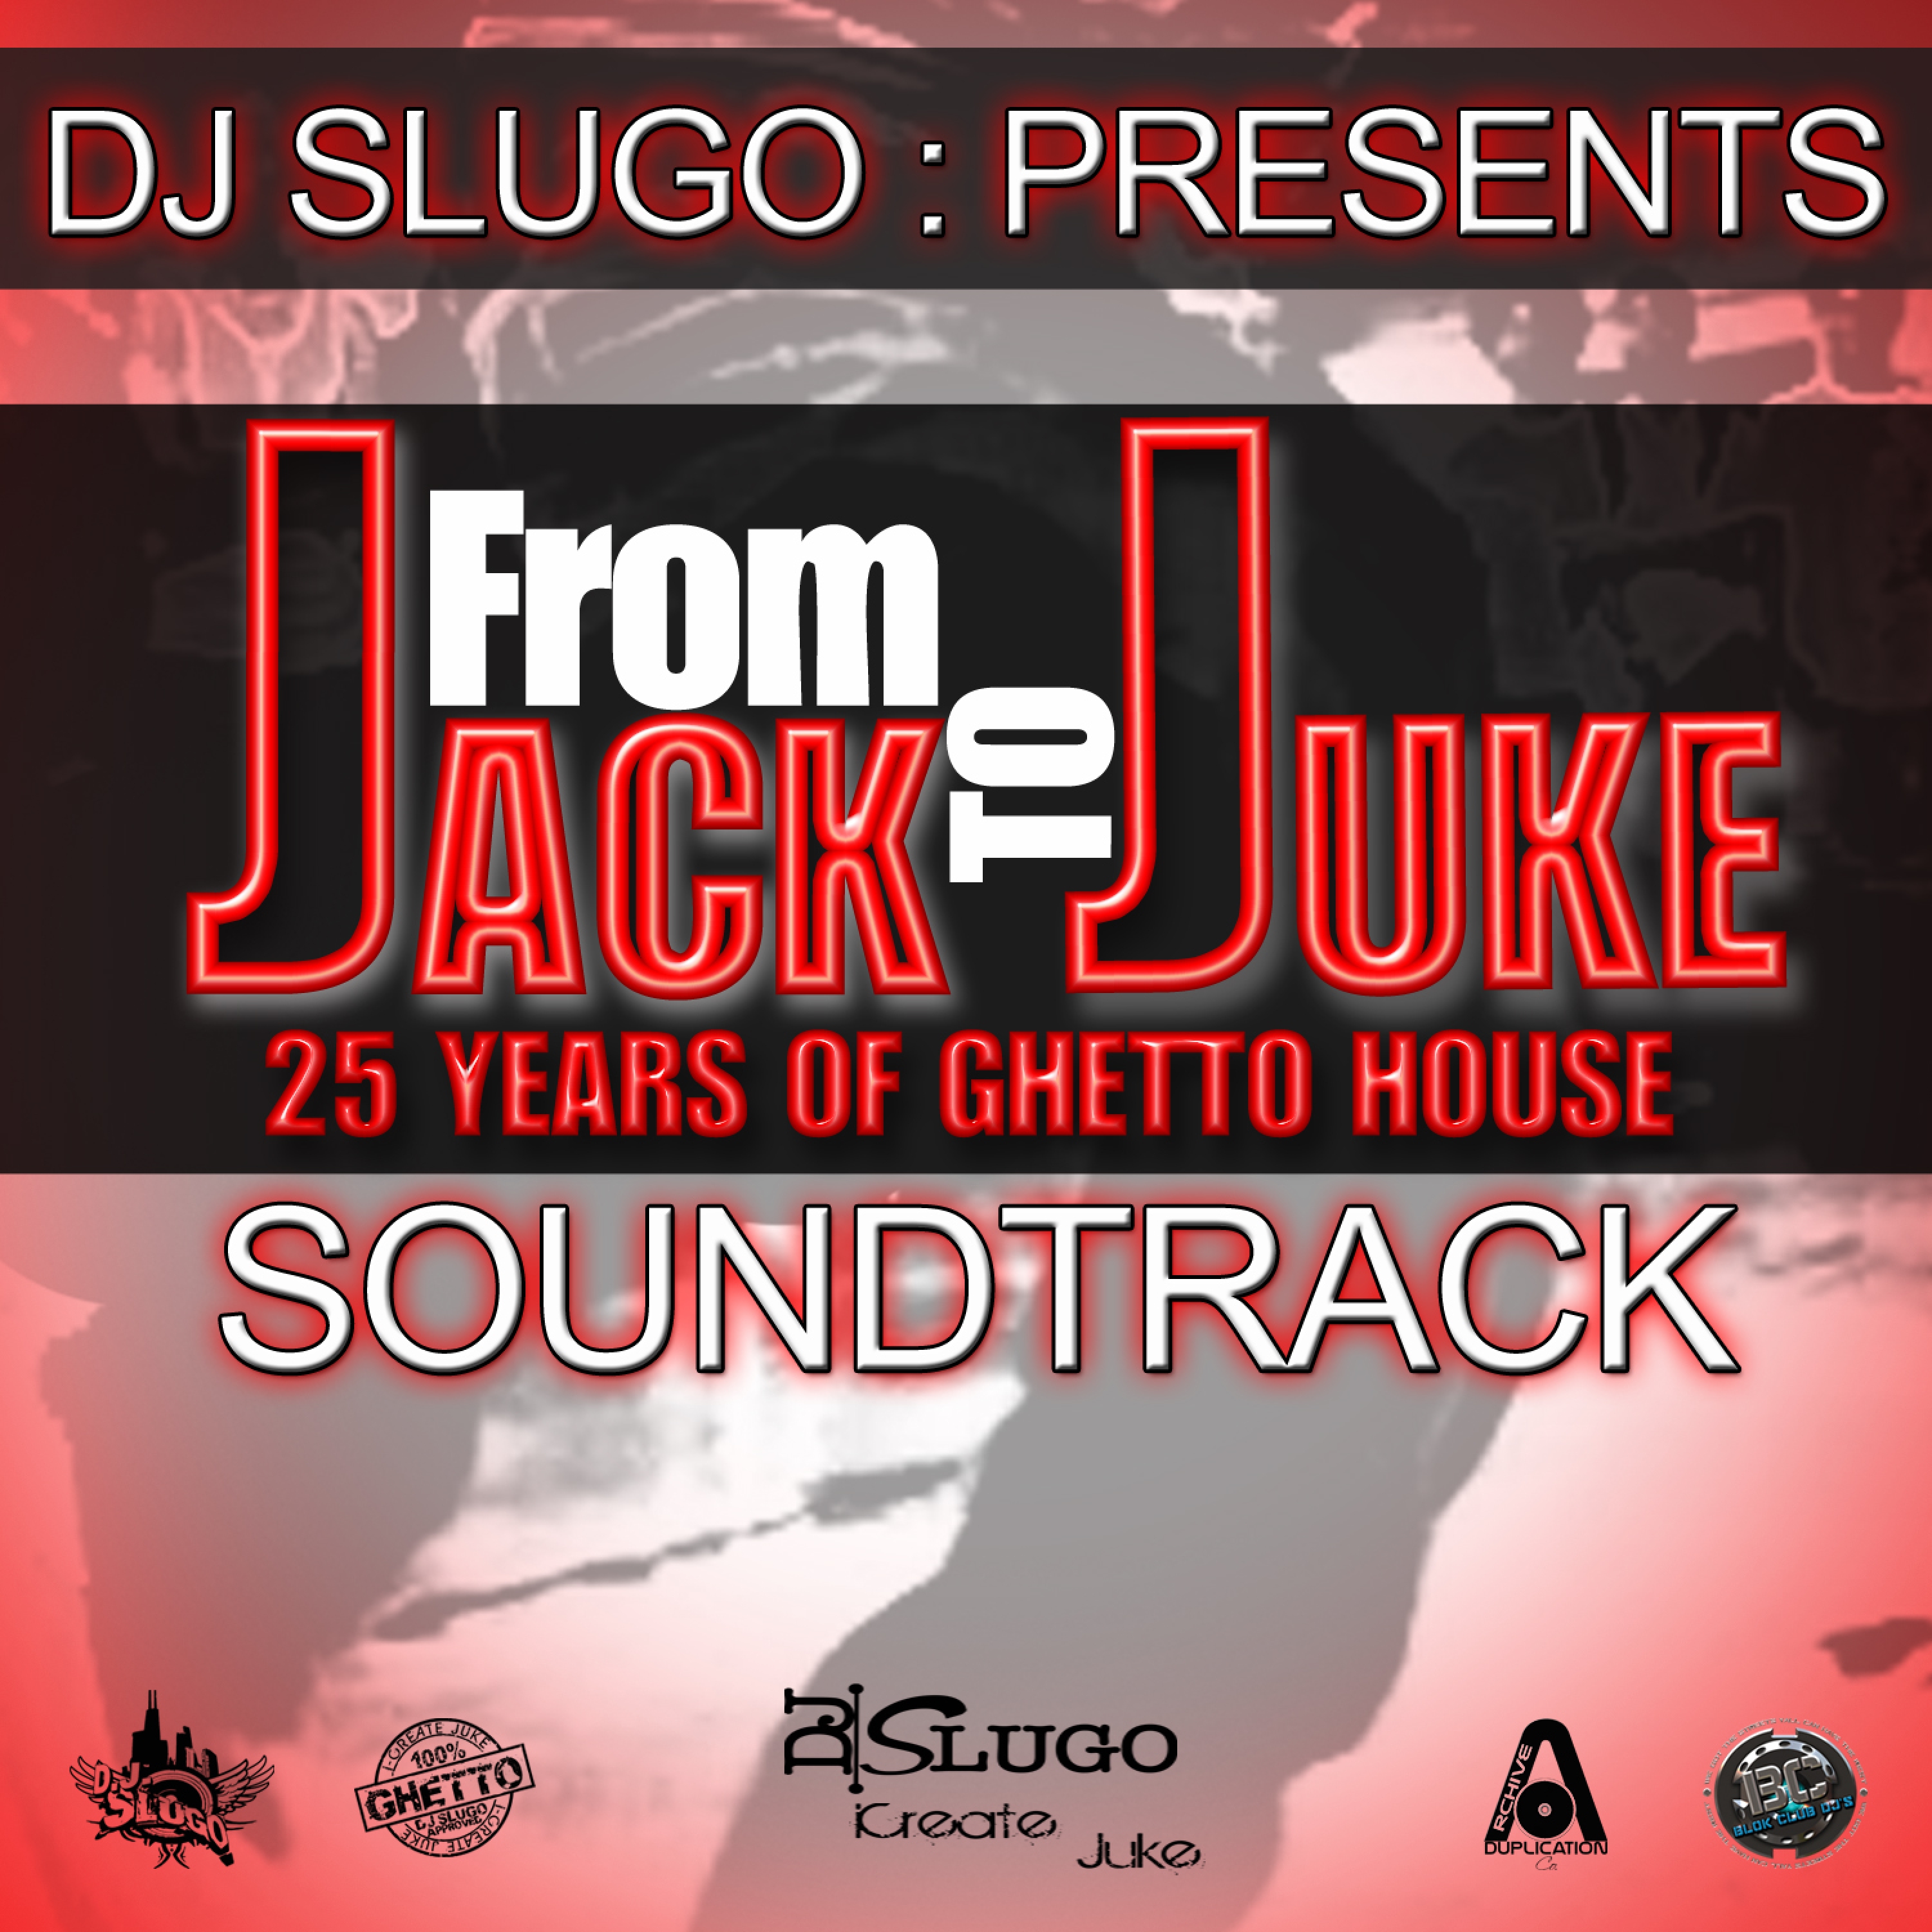 From Jack to Juke 25 Years of Ghetto House Soundtrack